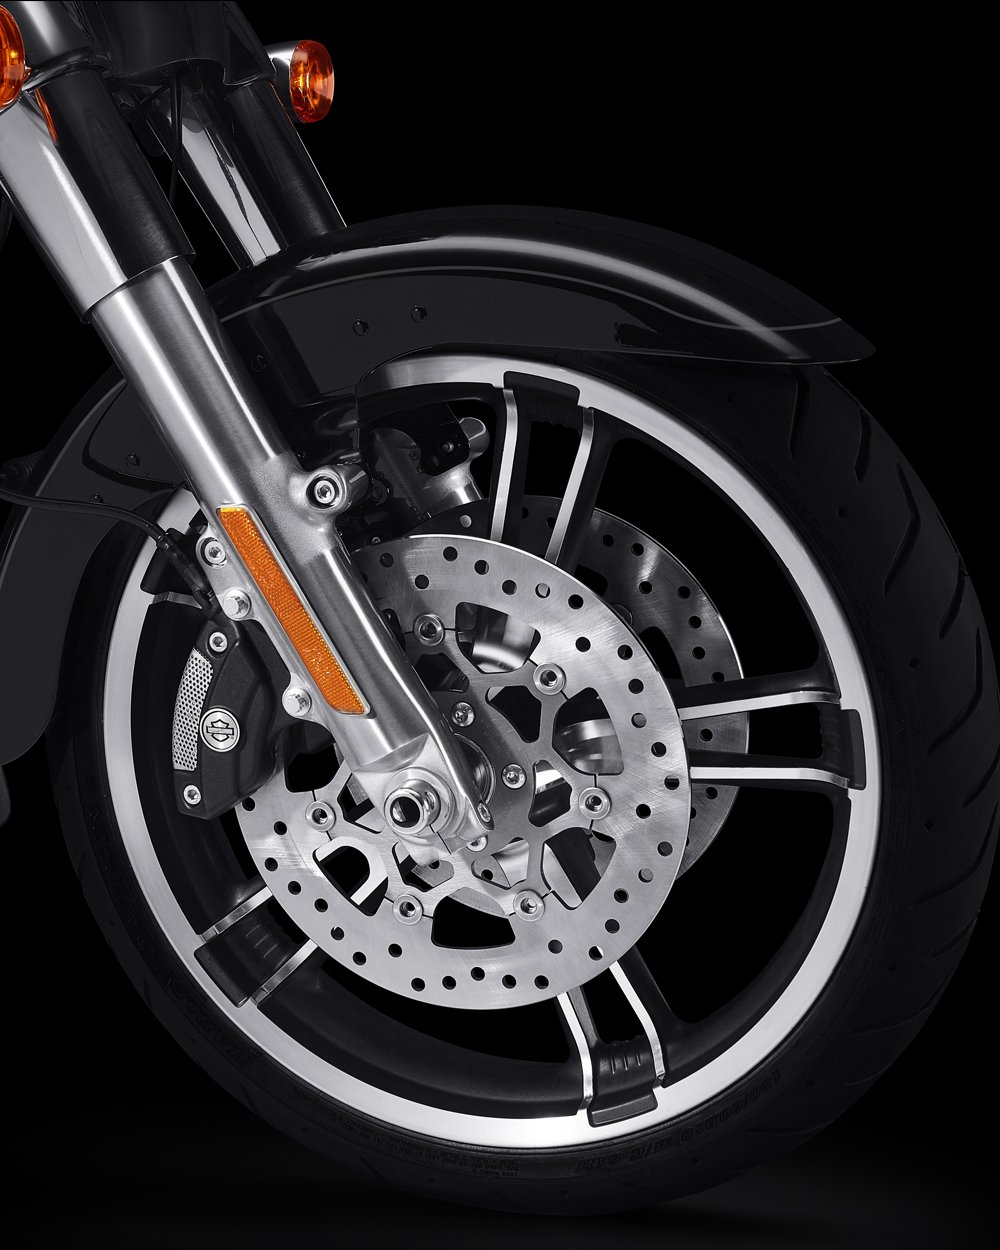 Reflex Linked Brembo Brakes with Standard ABS